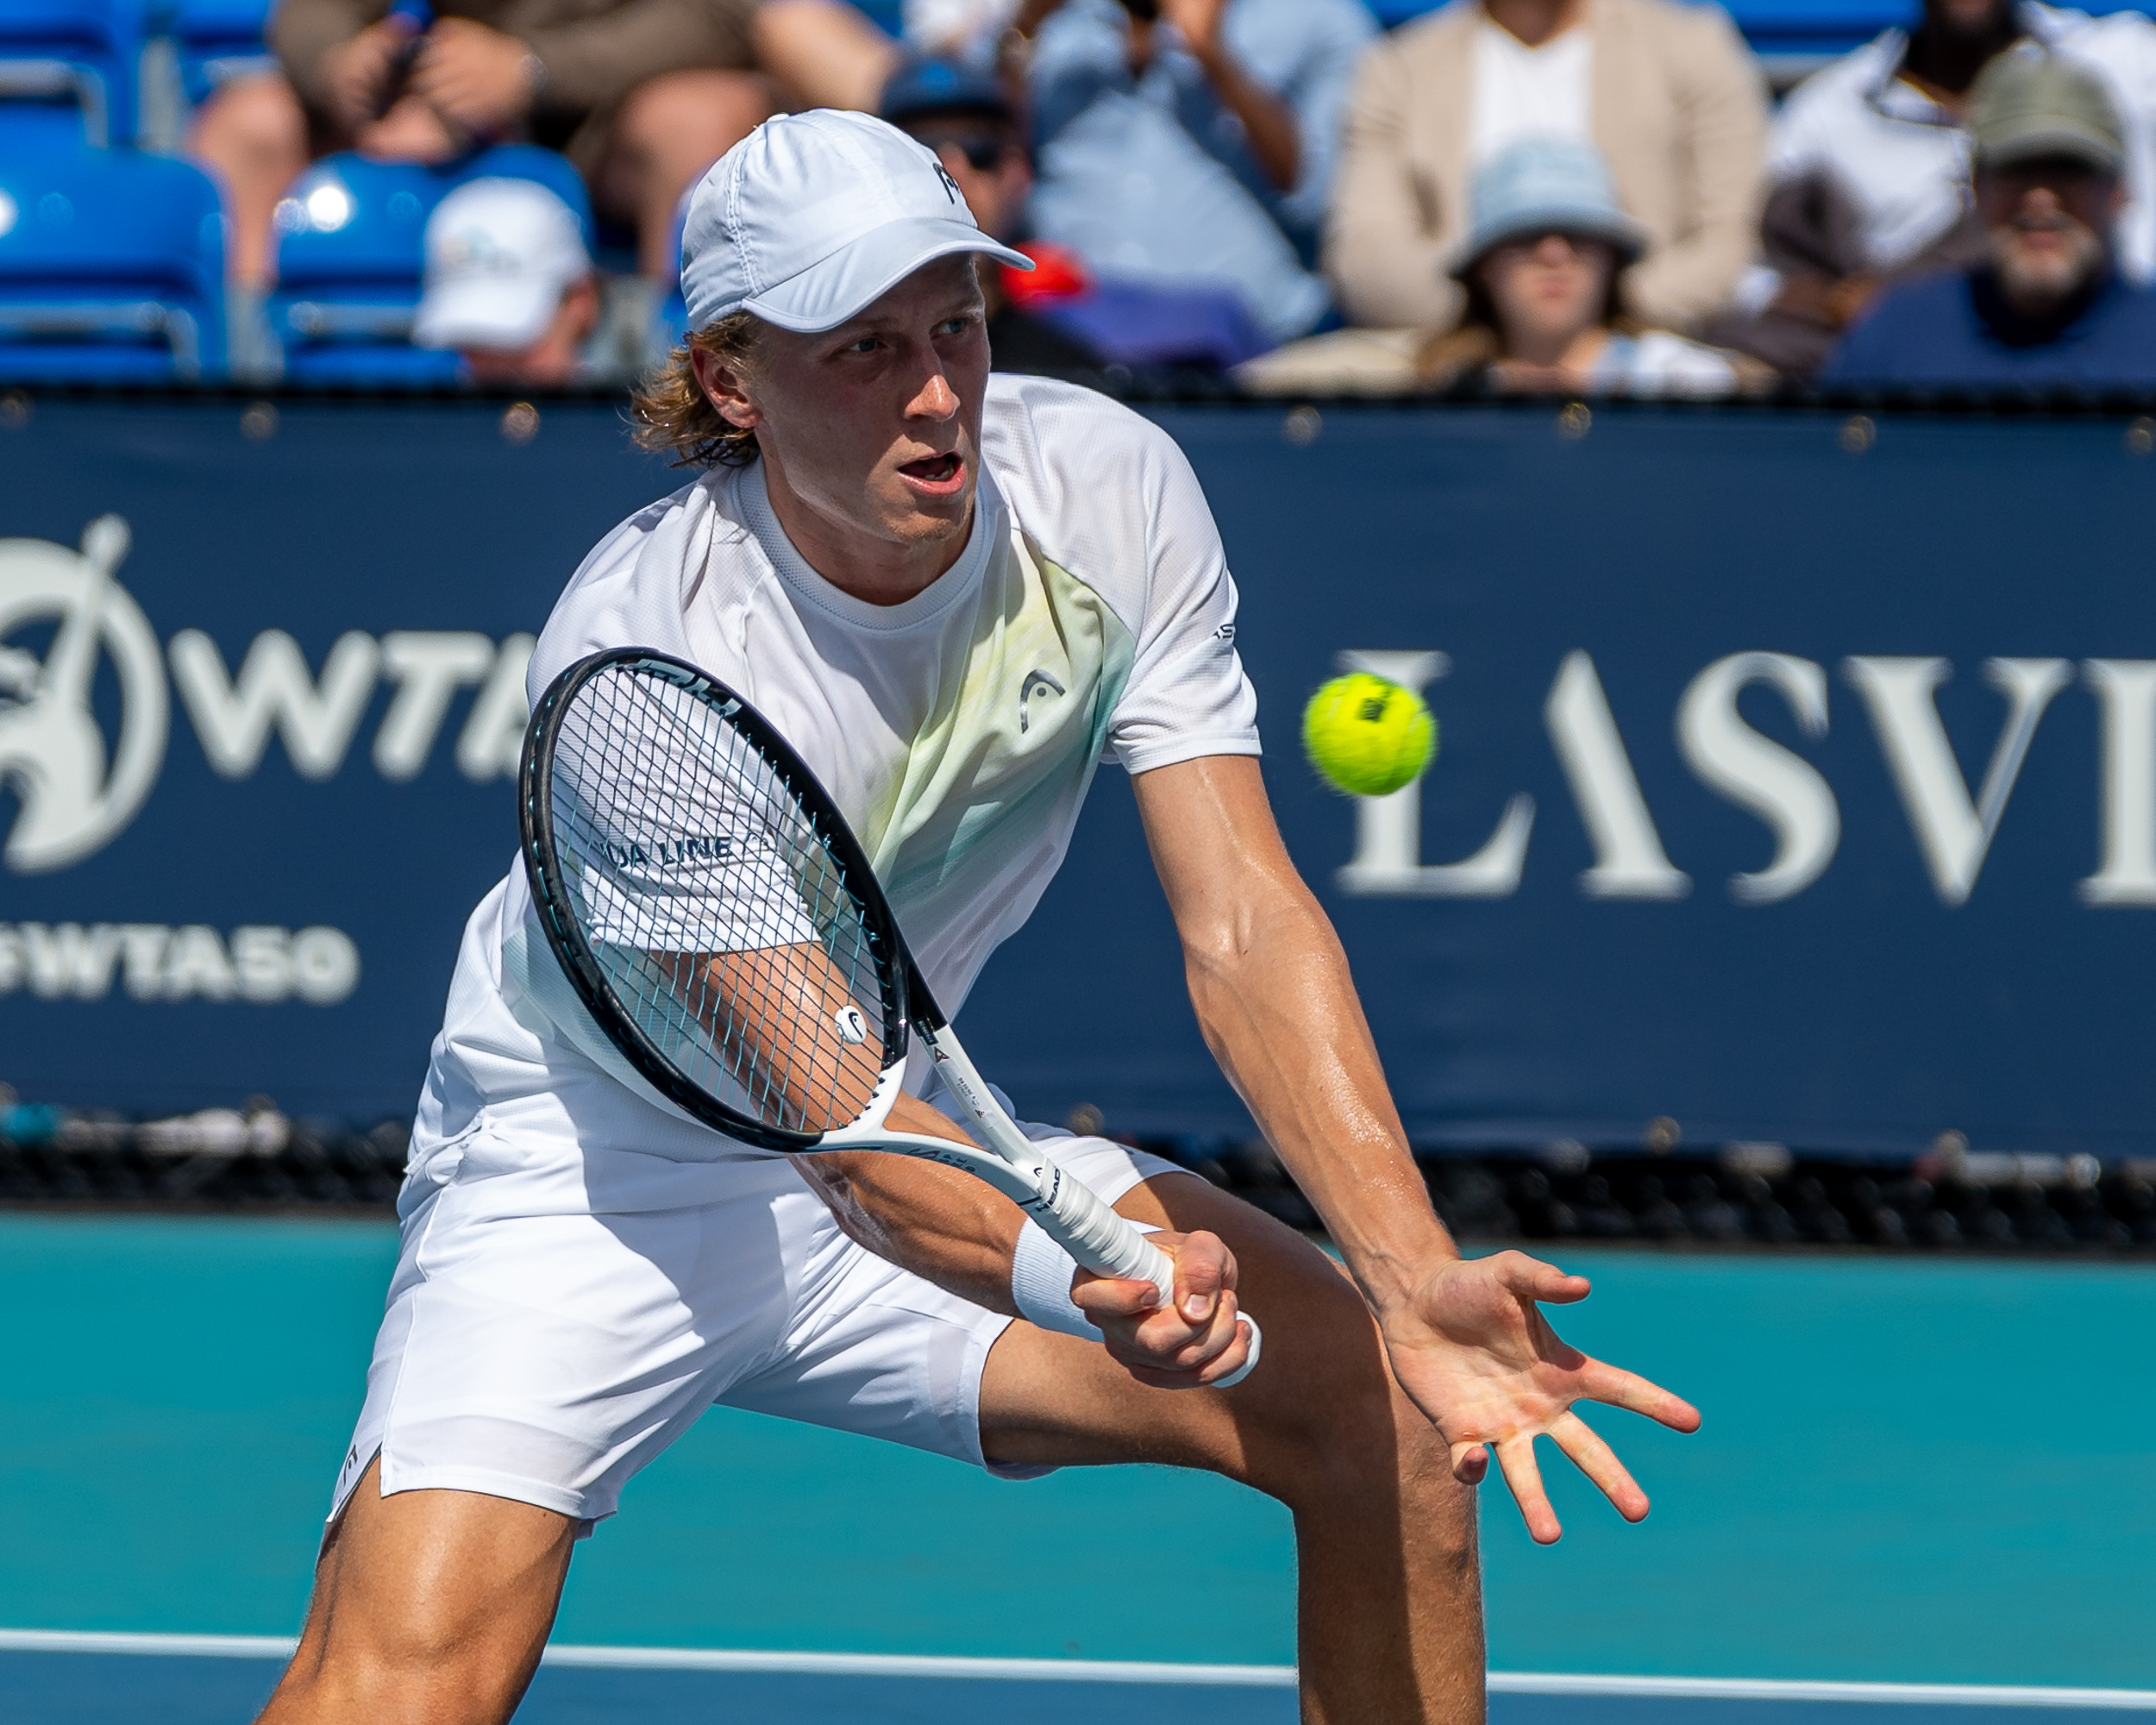 Emil Ruusuvuori volleys during his match against Taro Daniel on March 26 at the 2023 Miami Open.